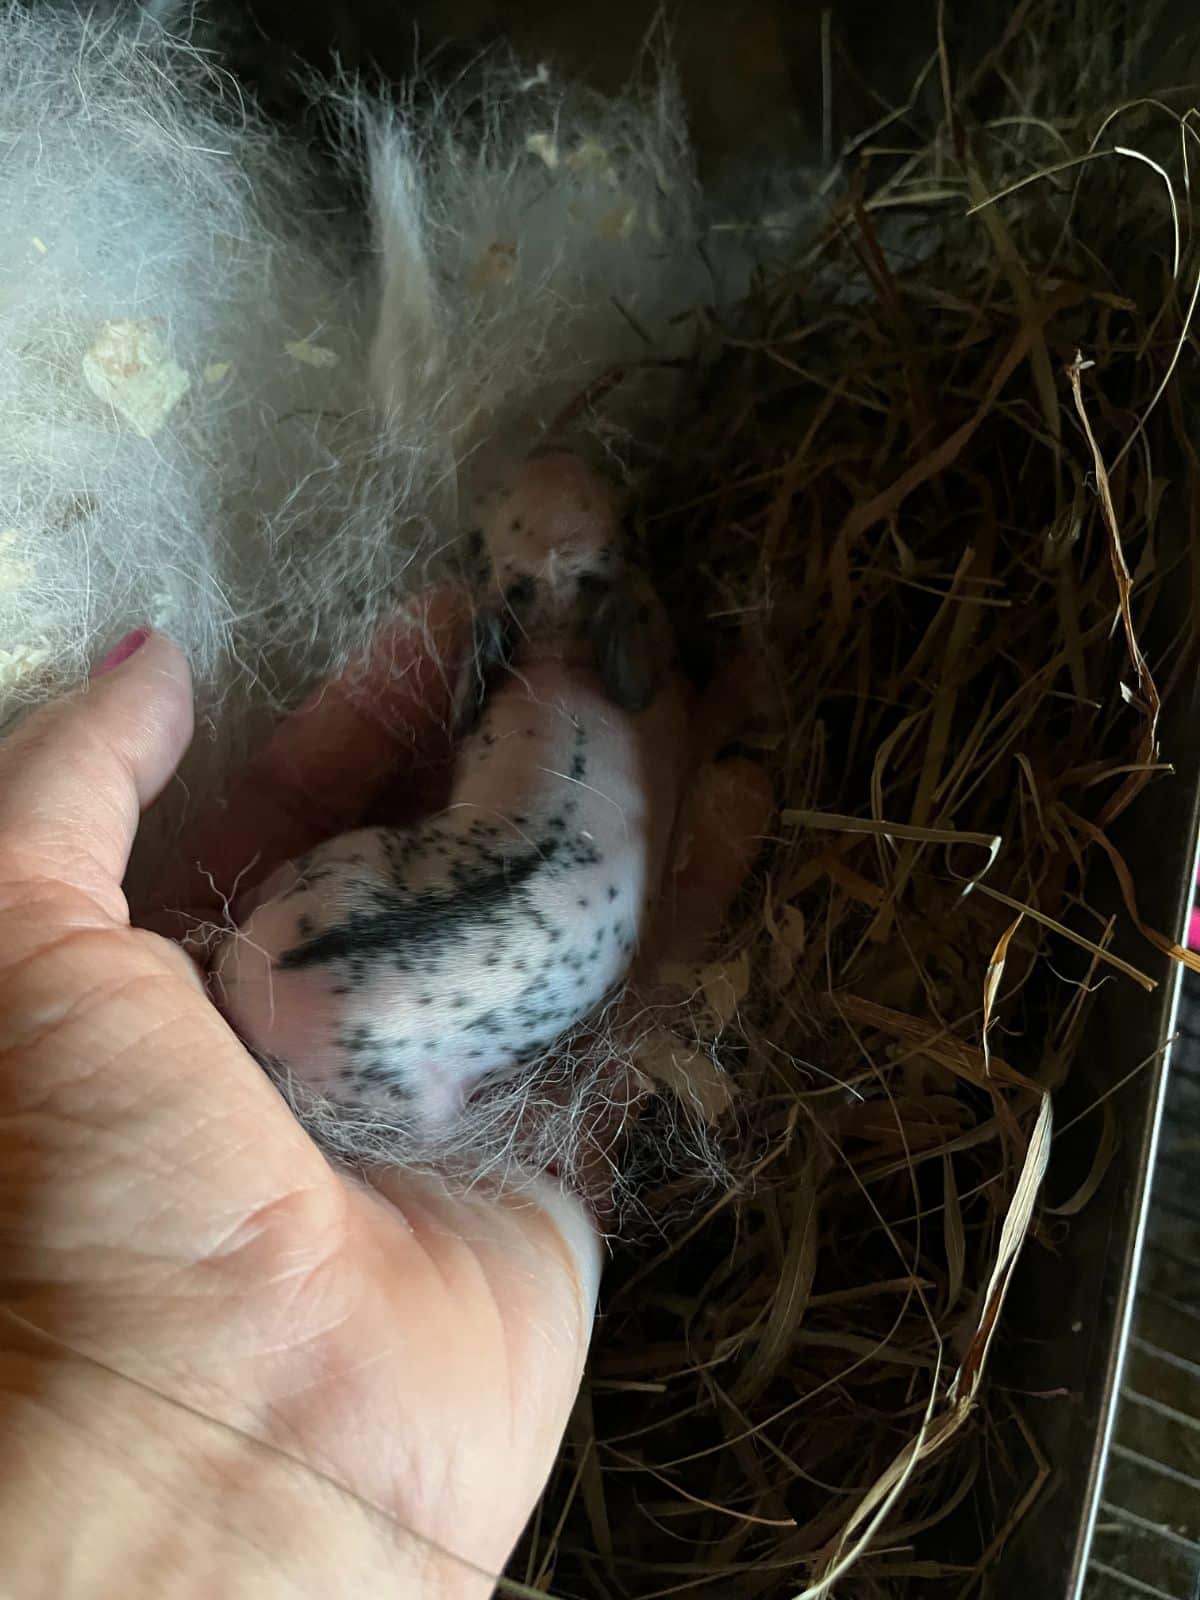 A rabbit kit at just a few days old, showing growth of fur already